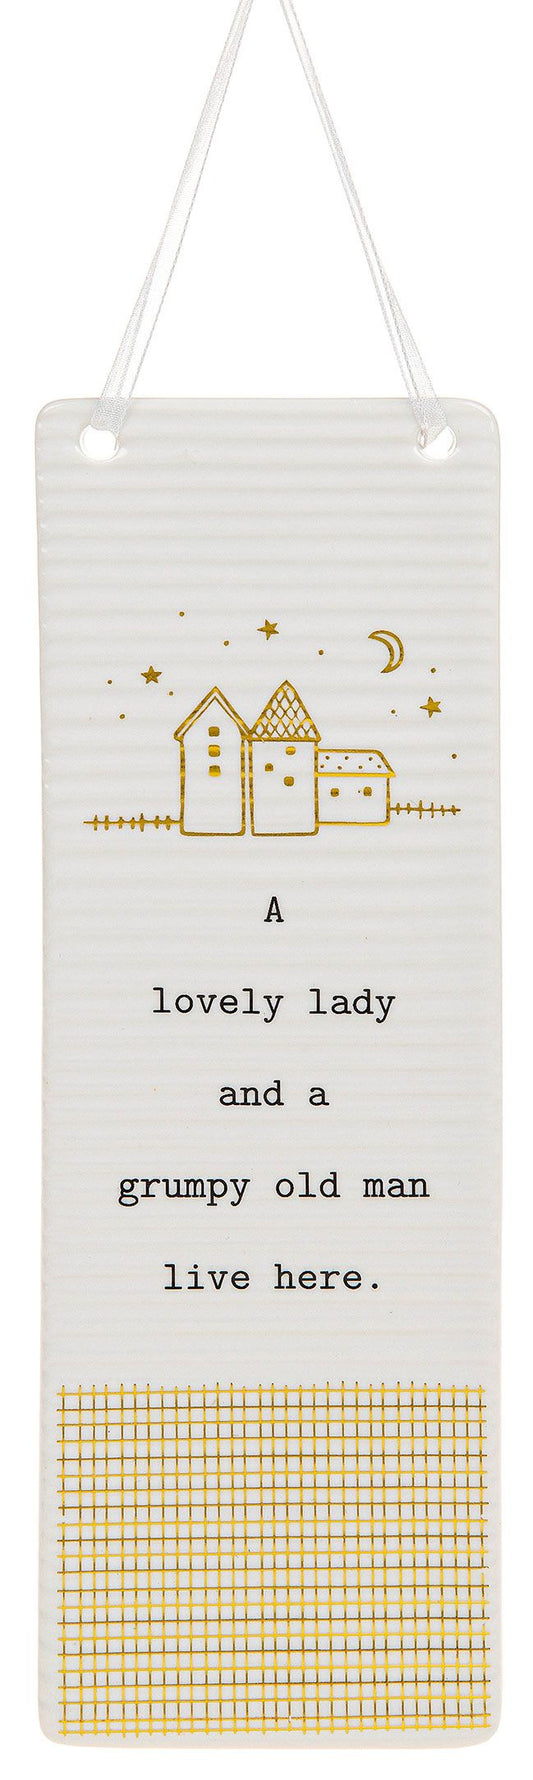 A Lovely Lady and a Grumpy Old Man Lives Here. Rectangle hanging plaque